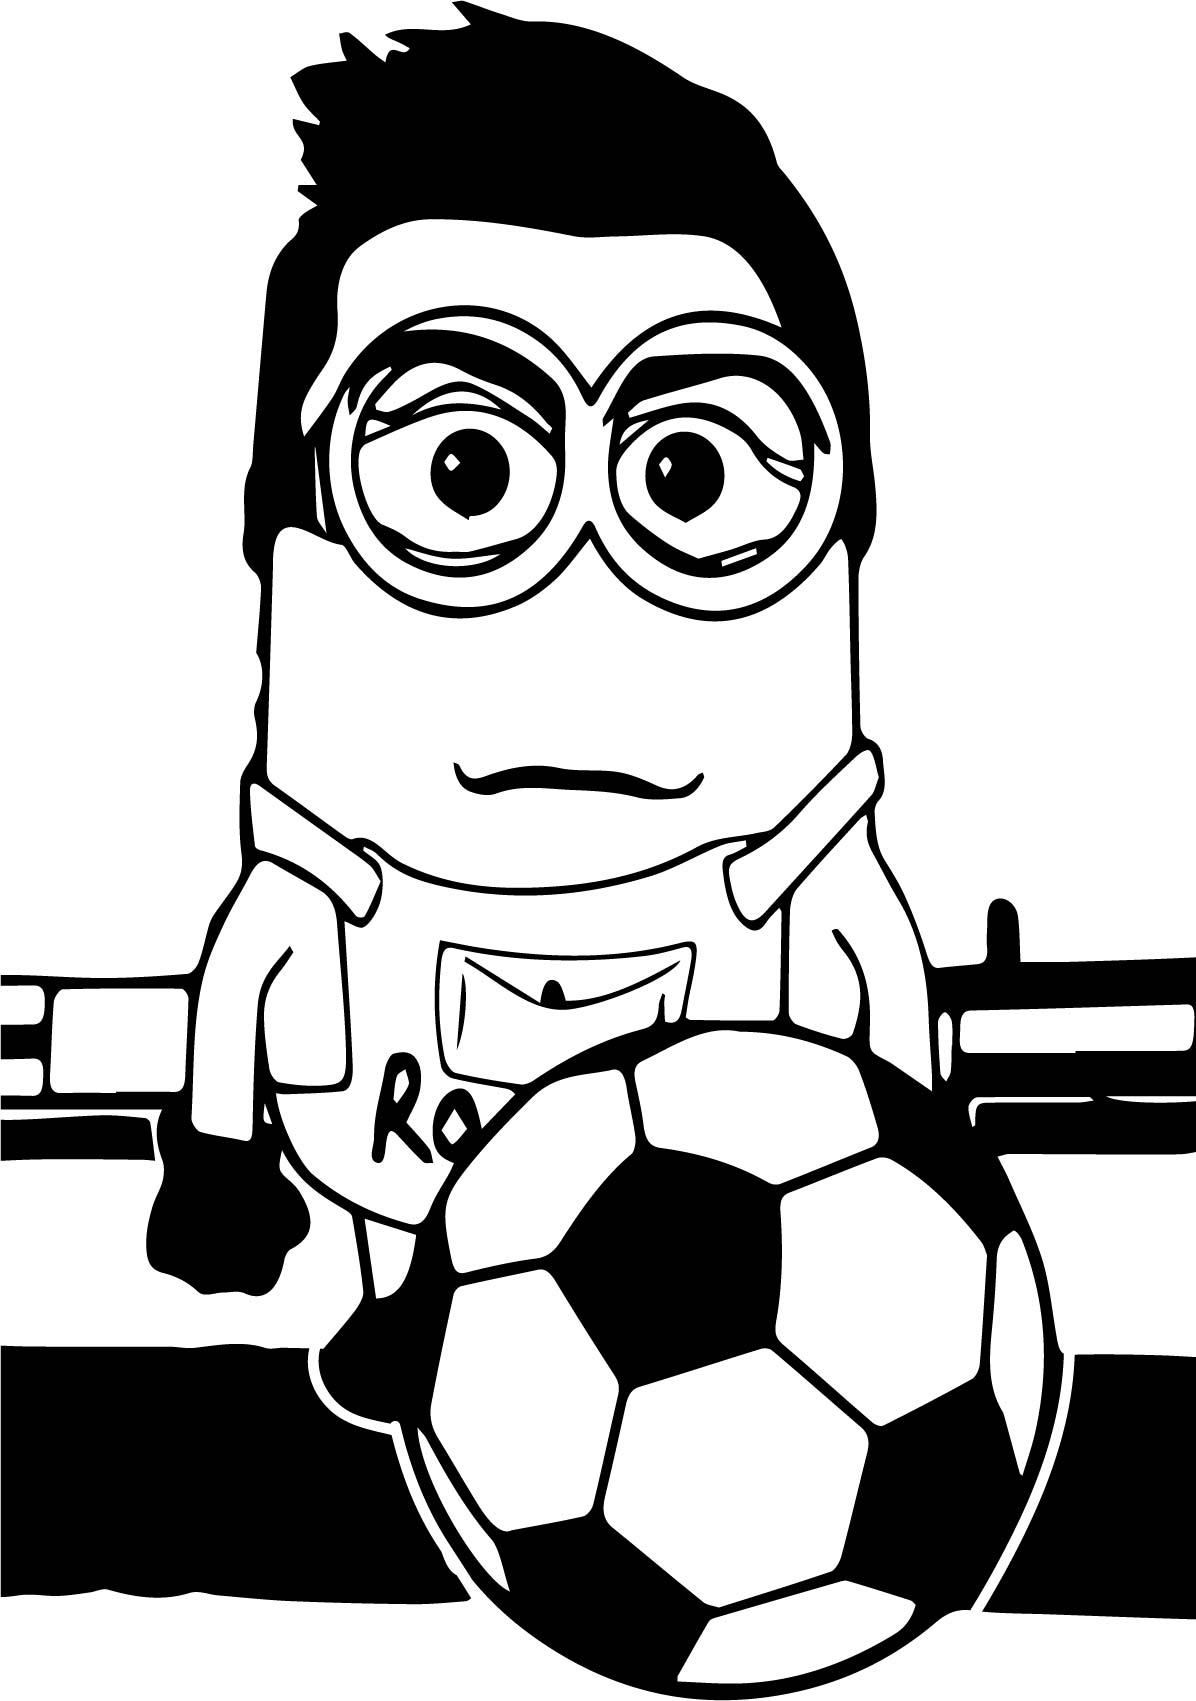 Cristiano Ronaldo Coloring Pages At Getcolorings | Free Printable concernant Coloriage Cristiano Ronaldo À Imprimer